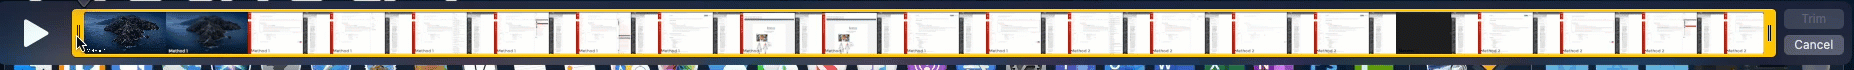 Gif showing the video timeline being dragged back and forth when using the Trim functionality.